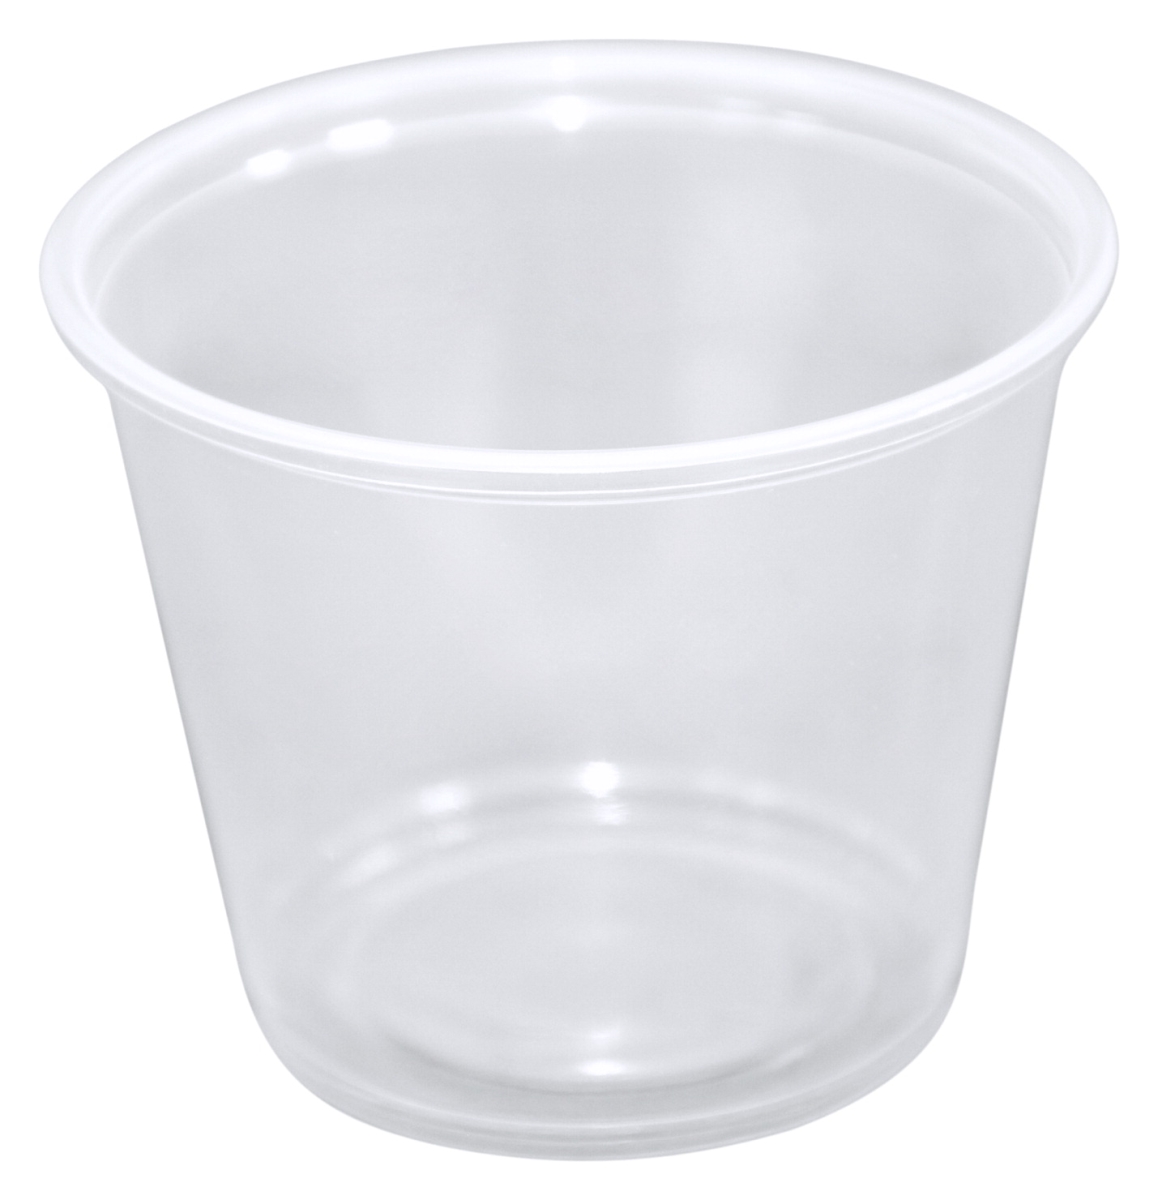 2003385 5 Oz Portion Cups, Clear - Pack Of 2500